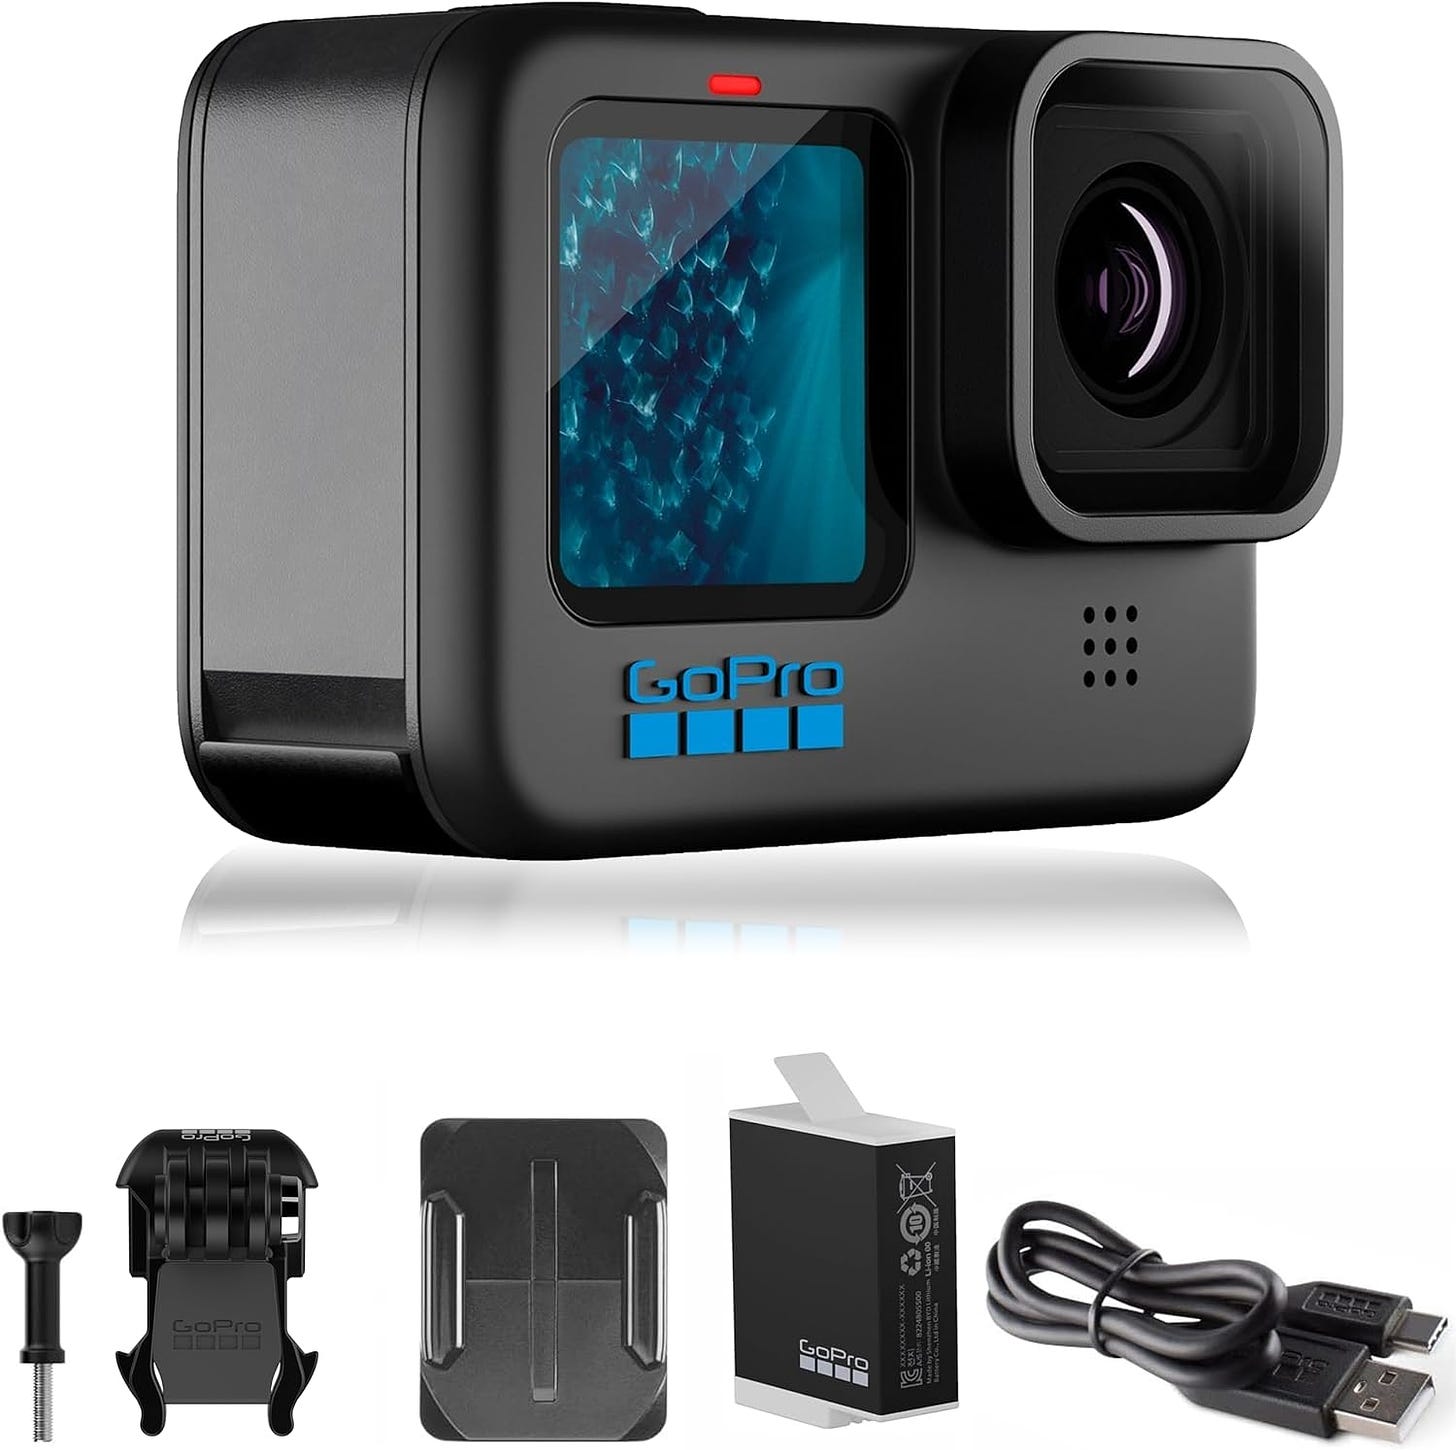 GoPro HERO11 Black action camera with 5.3K video resolution and waterproof design for adventure vlogging